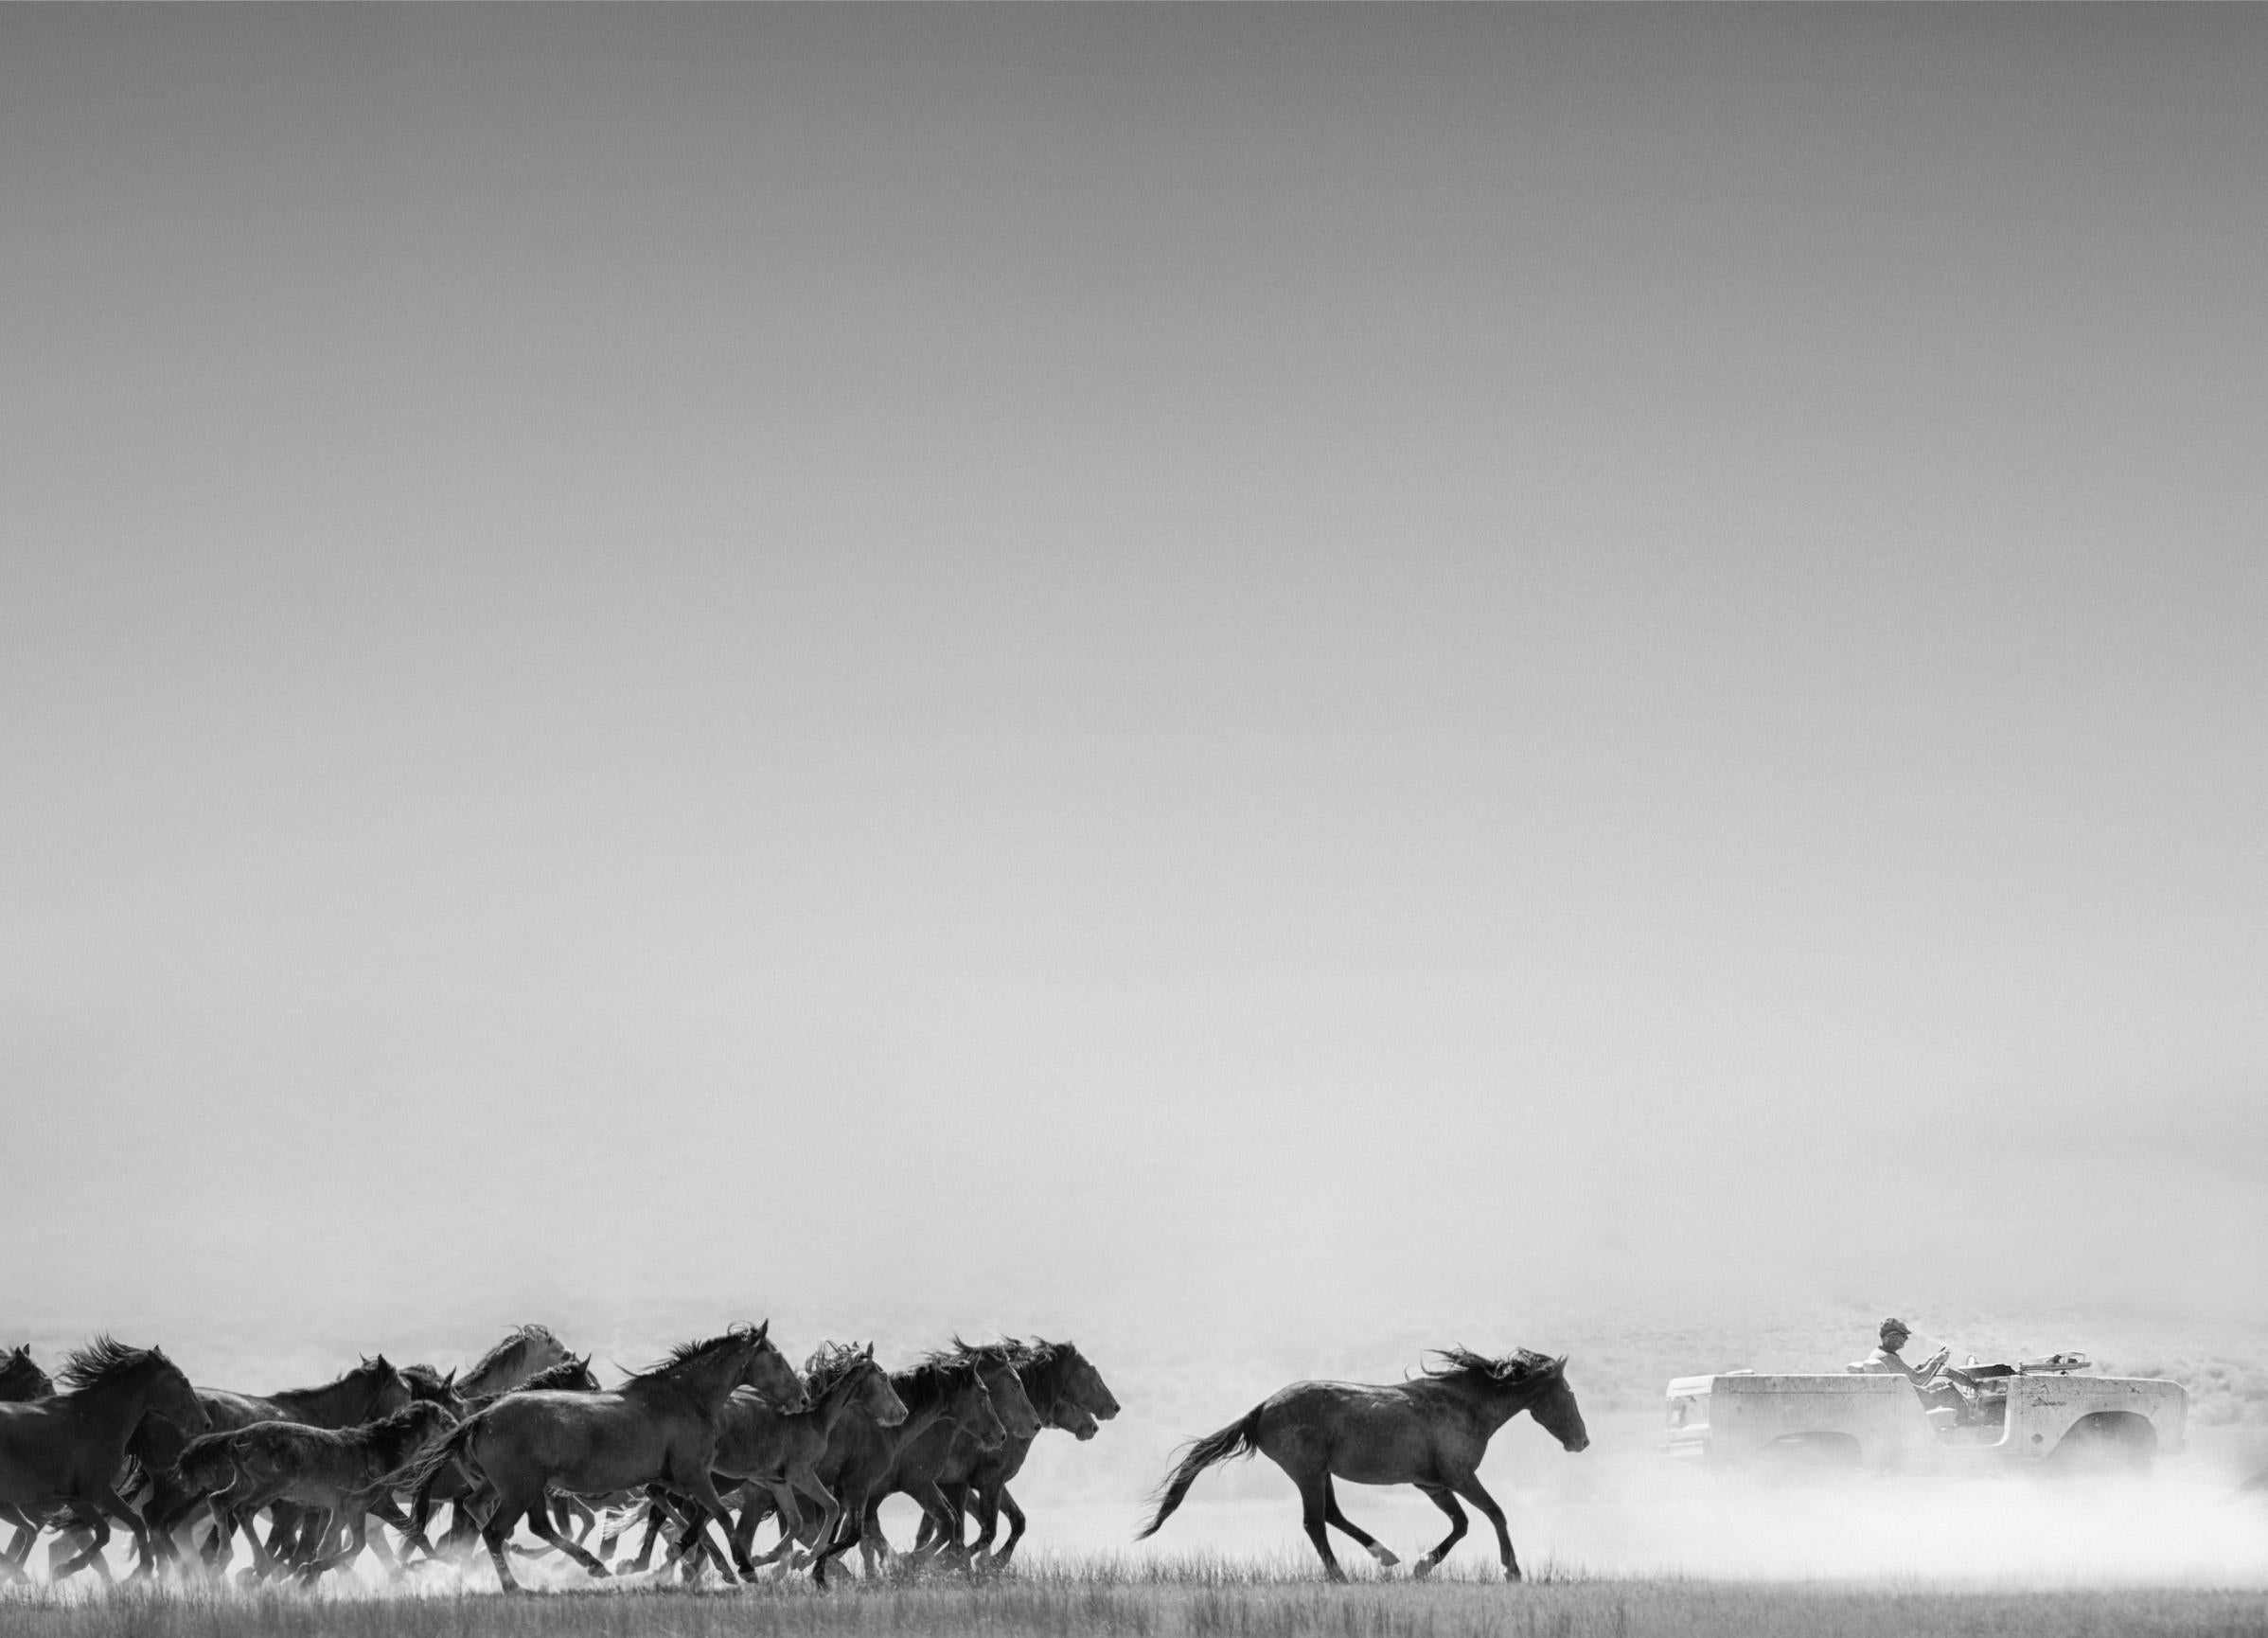 Shane Russeck Animal Print - AMERICAN HORSE POWER 40x60 B&W Photography Wild Horses Mustangs FORD BRONCO 